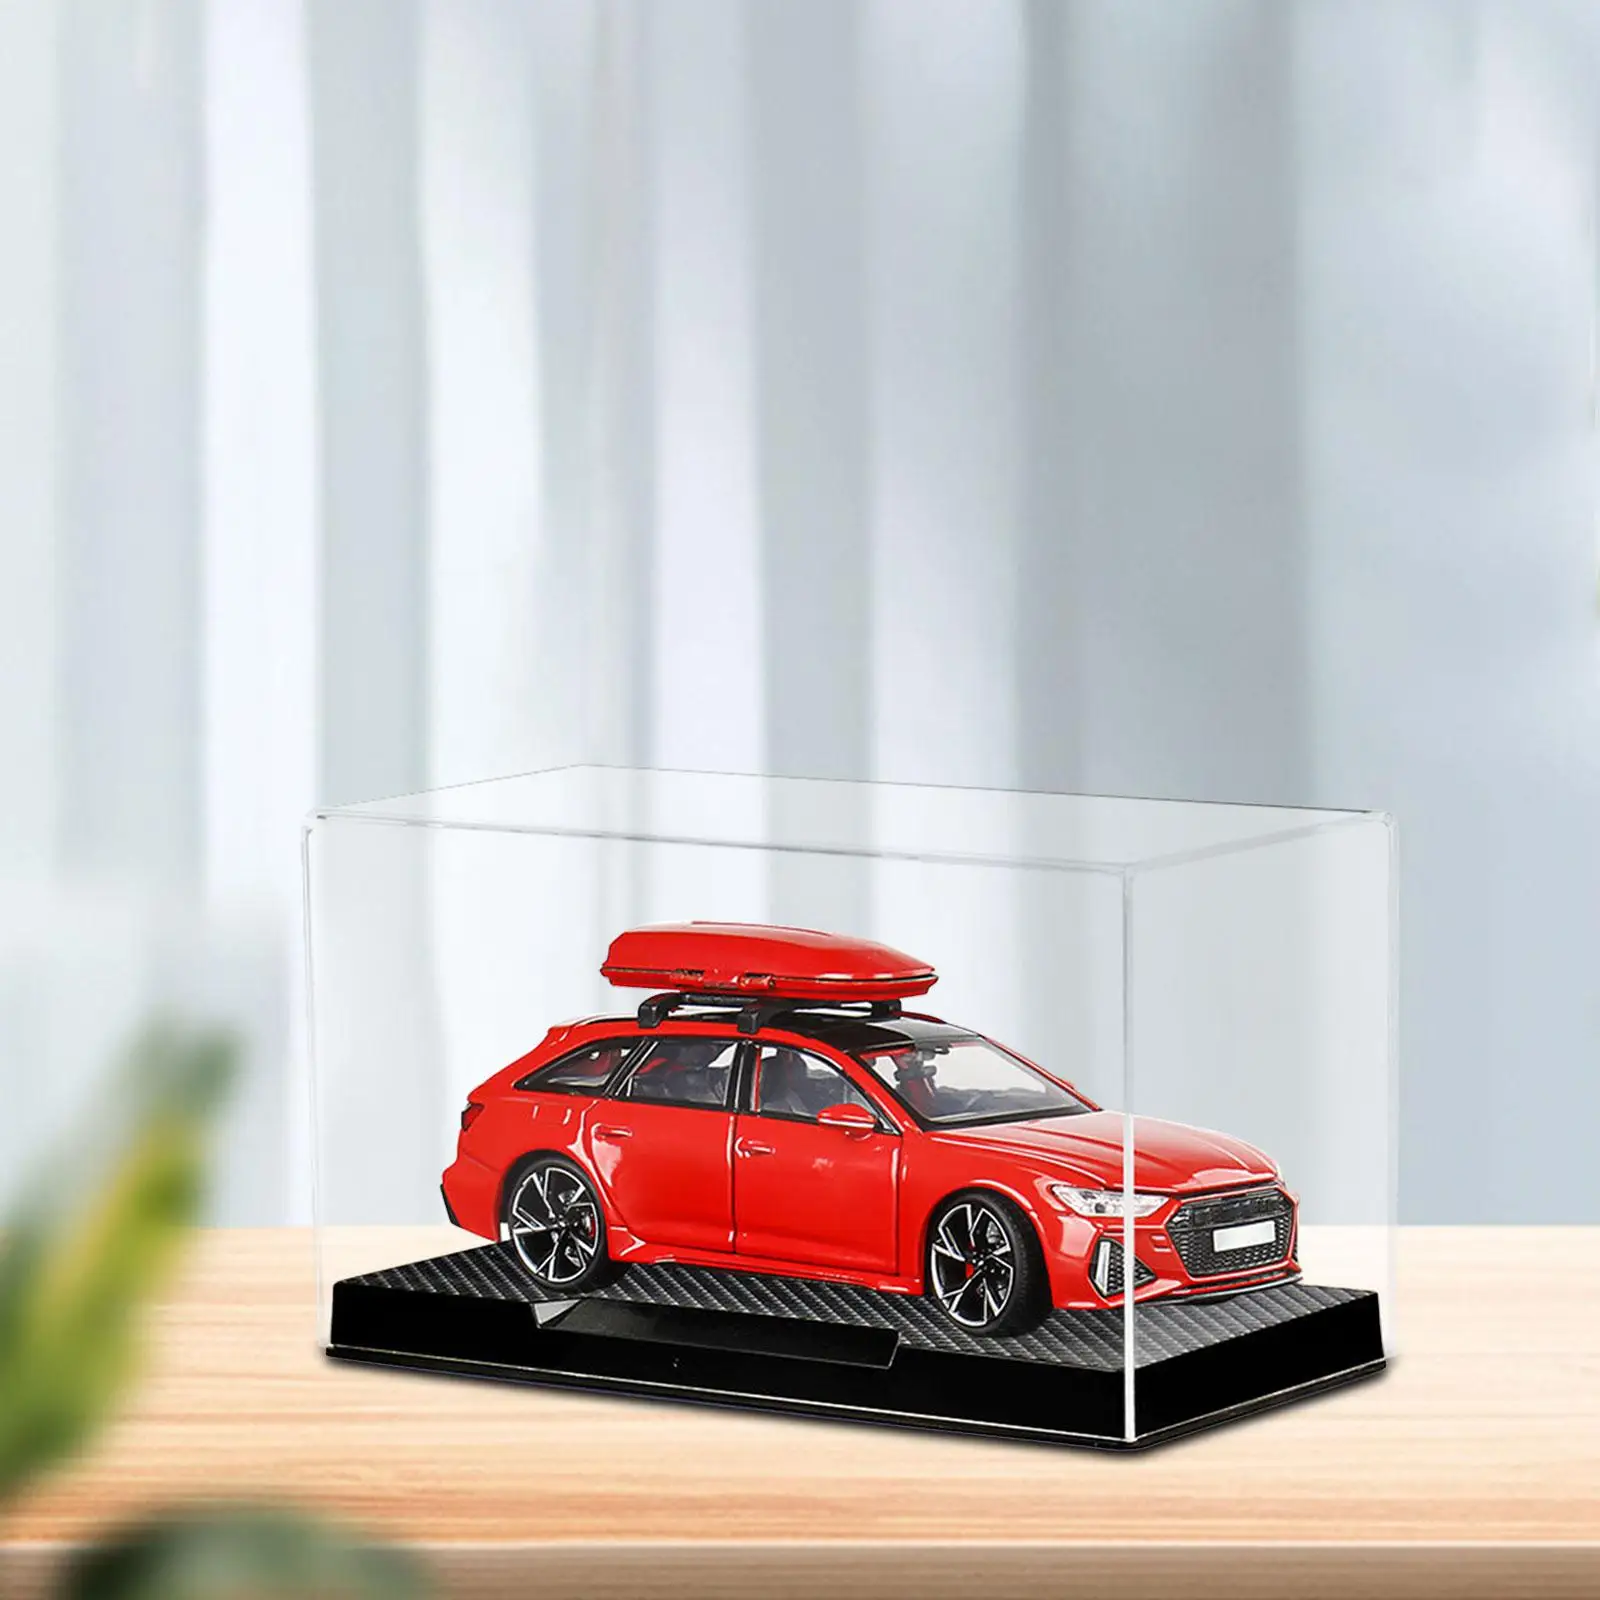 Acrylic Clear Display Case Strong Display Case Protection Display Stand for